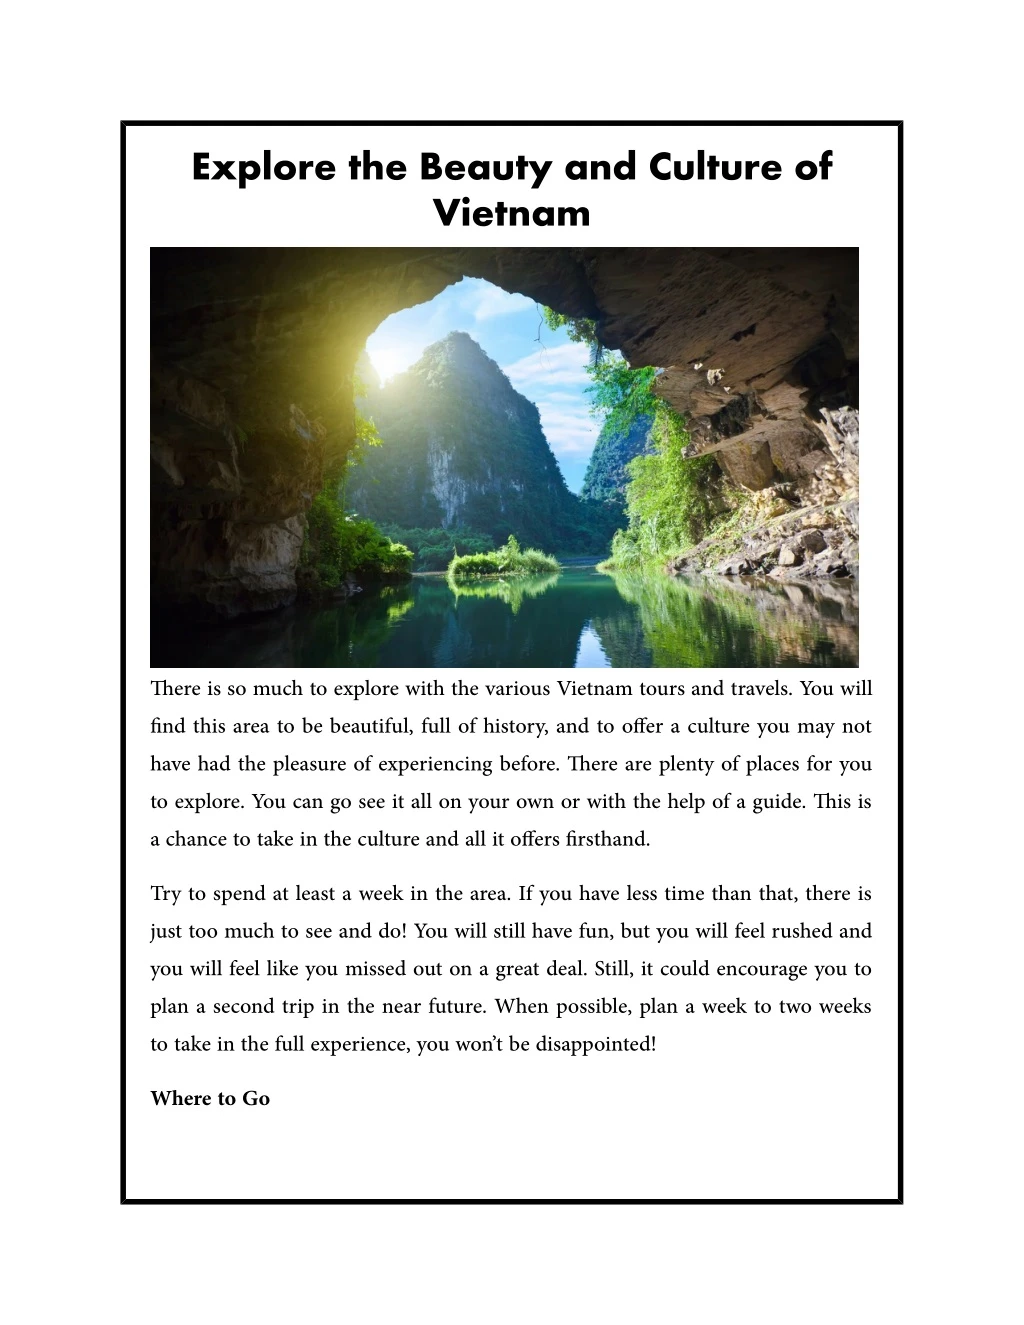 explore the beauty and culture of vietnam